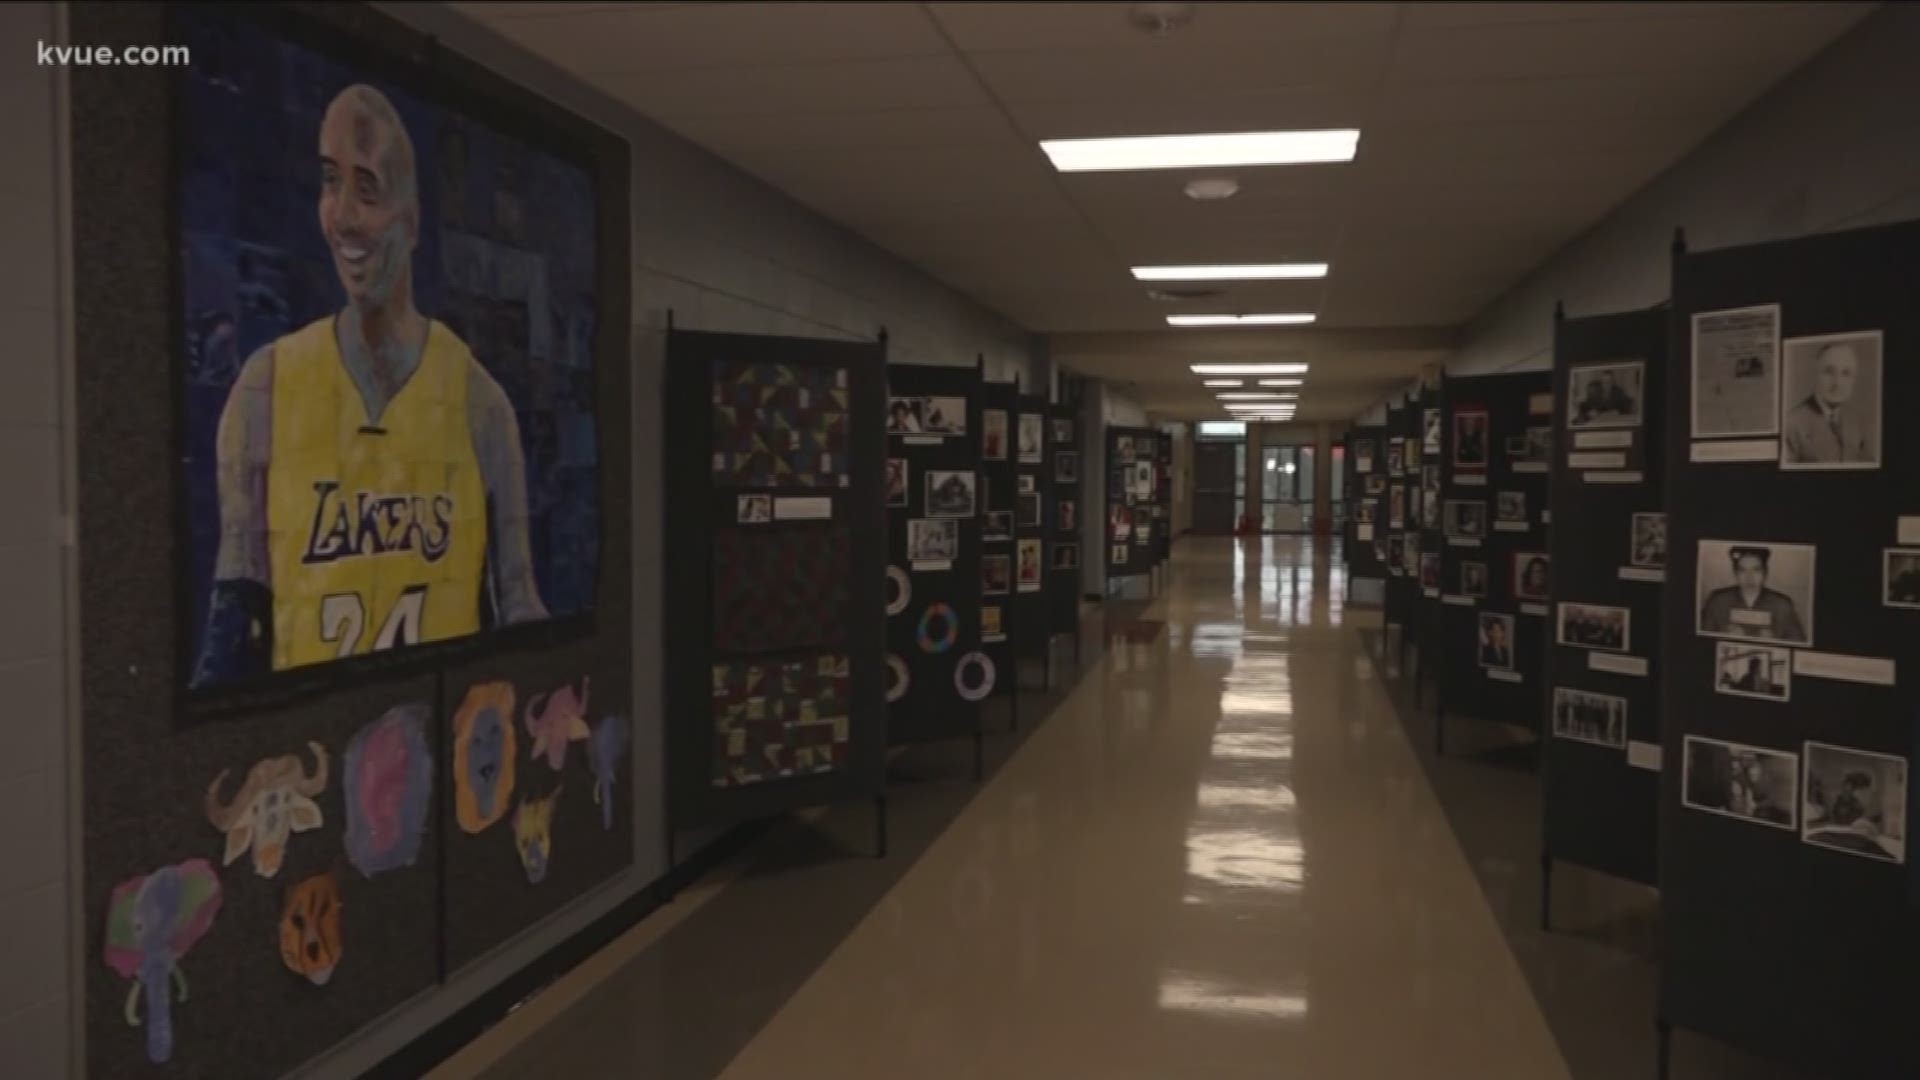 KVUE's Kalyn Norwood shares how students in Manor are honoring past and present leaders through art.